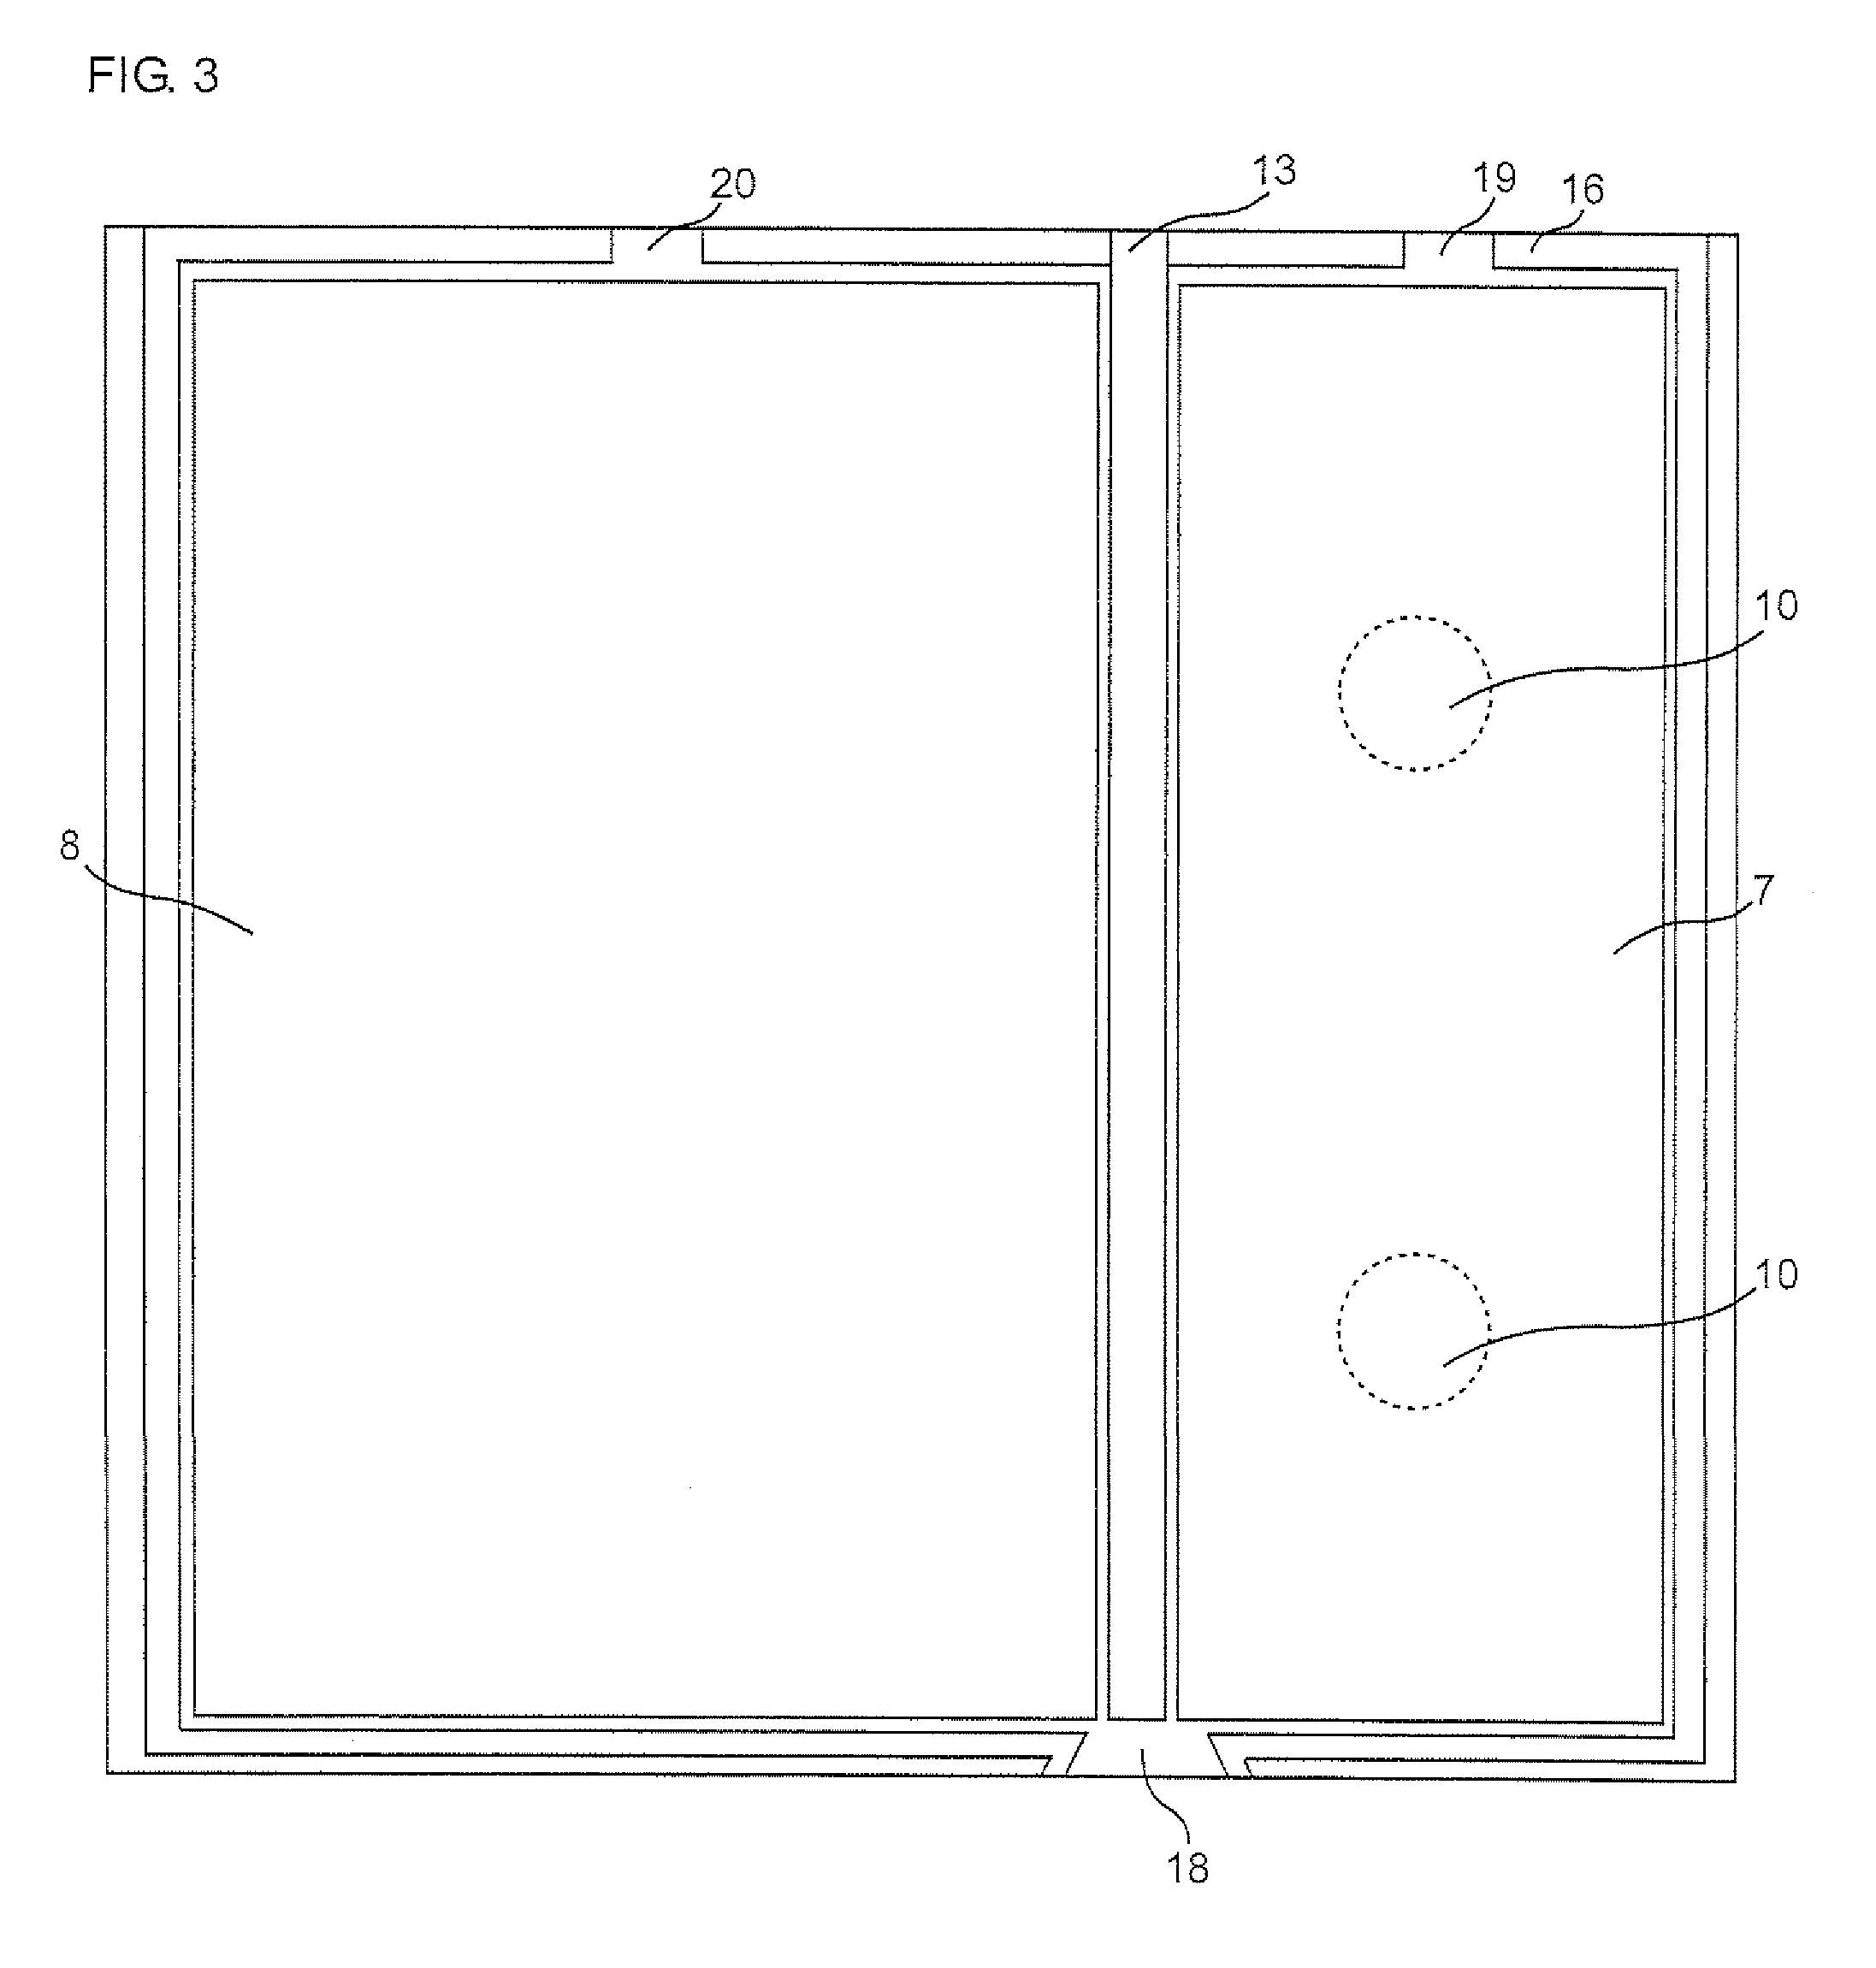 Hydrogen production device and method for producing hydrogen